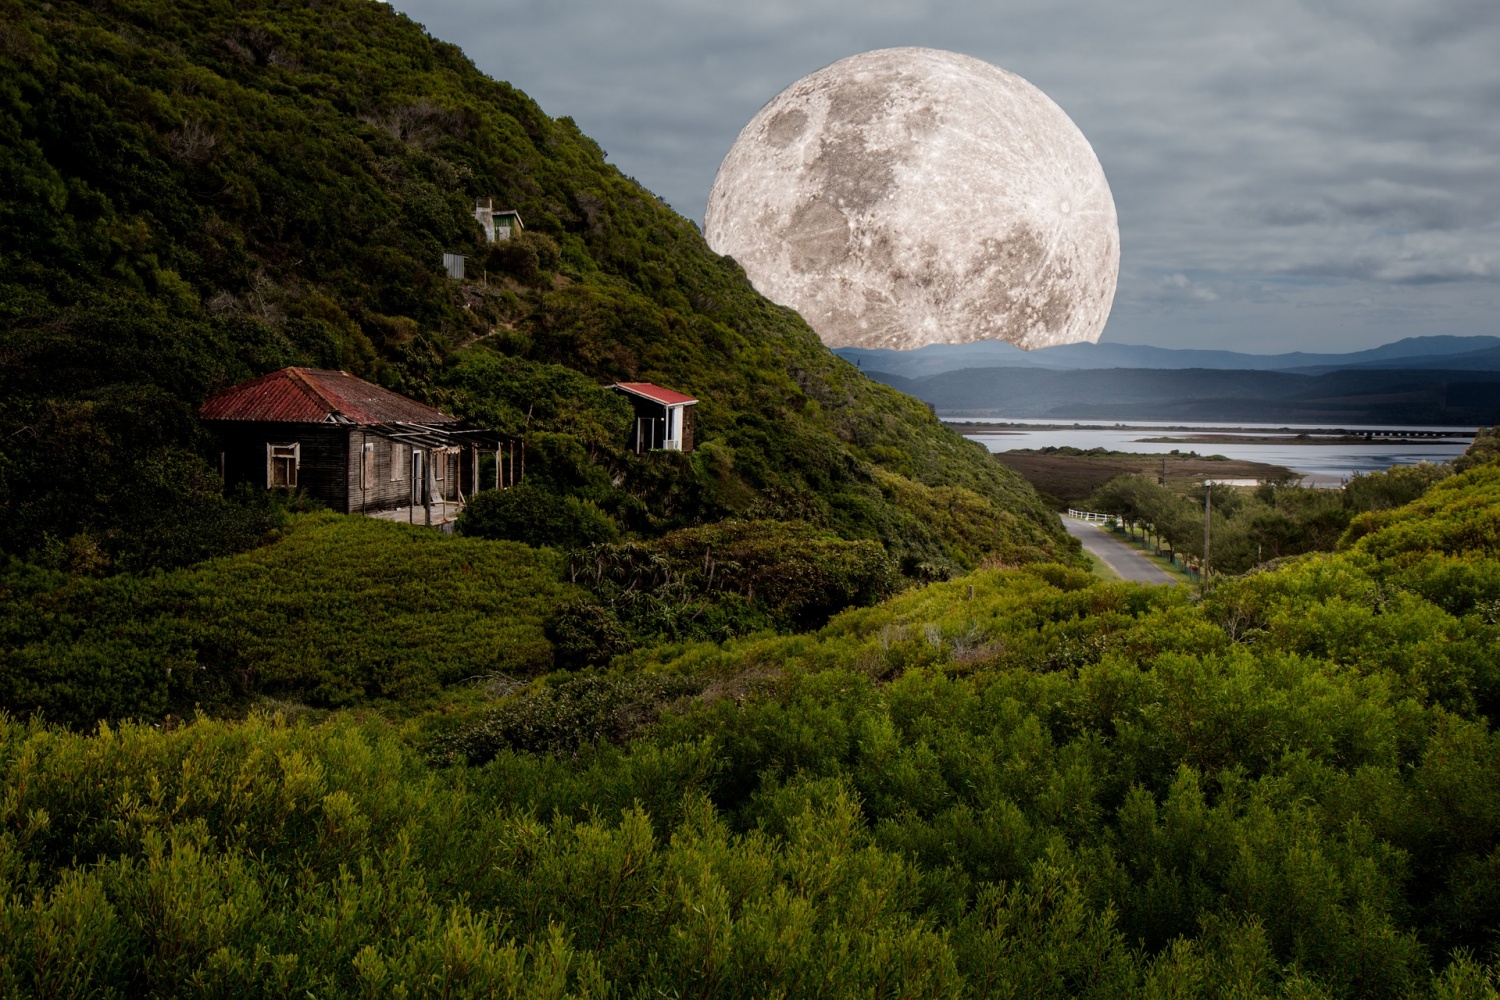 This supermoon has a twist – expect flooding, but a lunar cycle is masking  effects of sea level rise